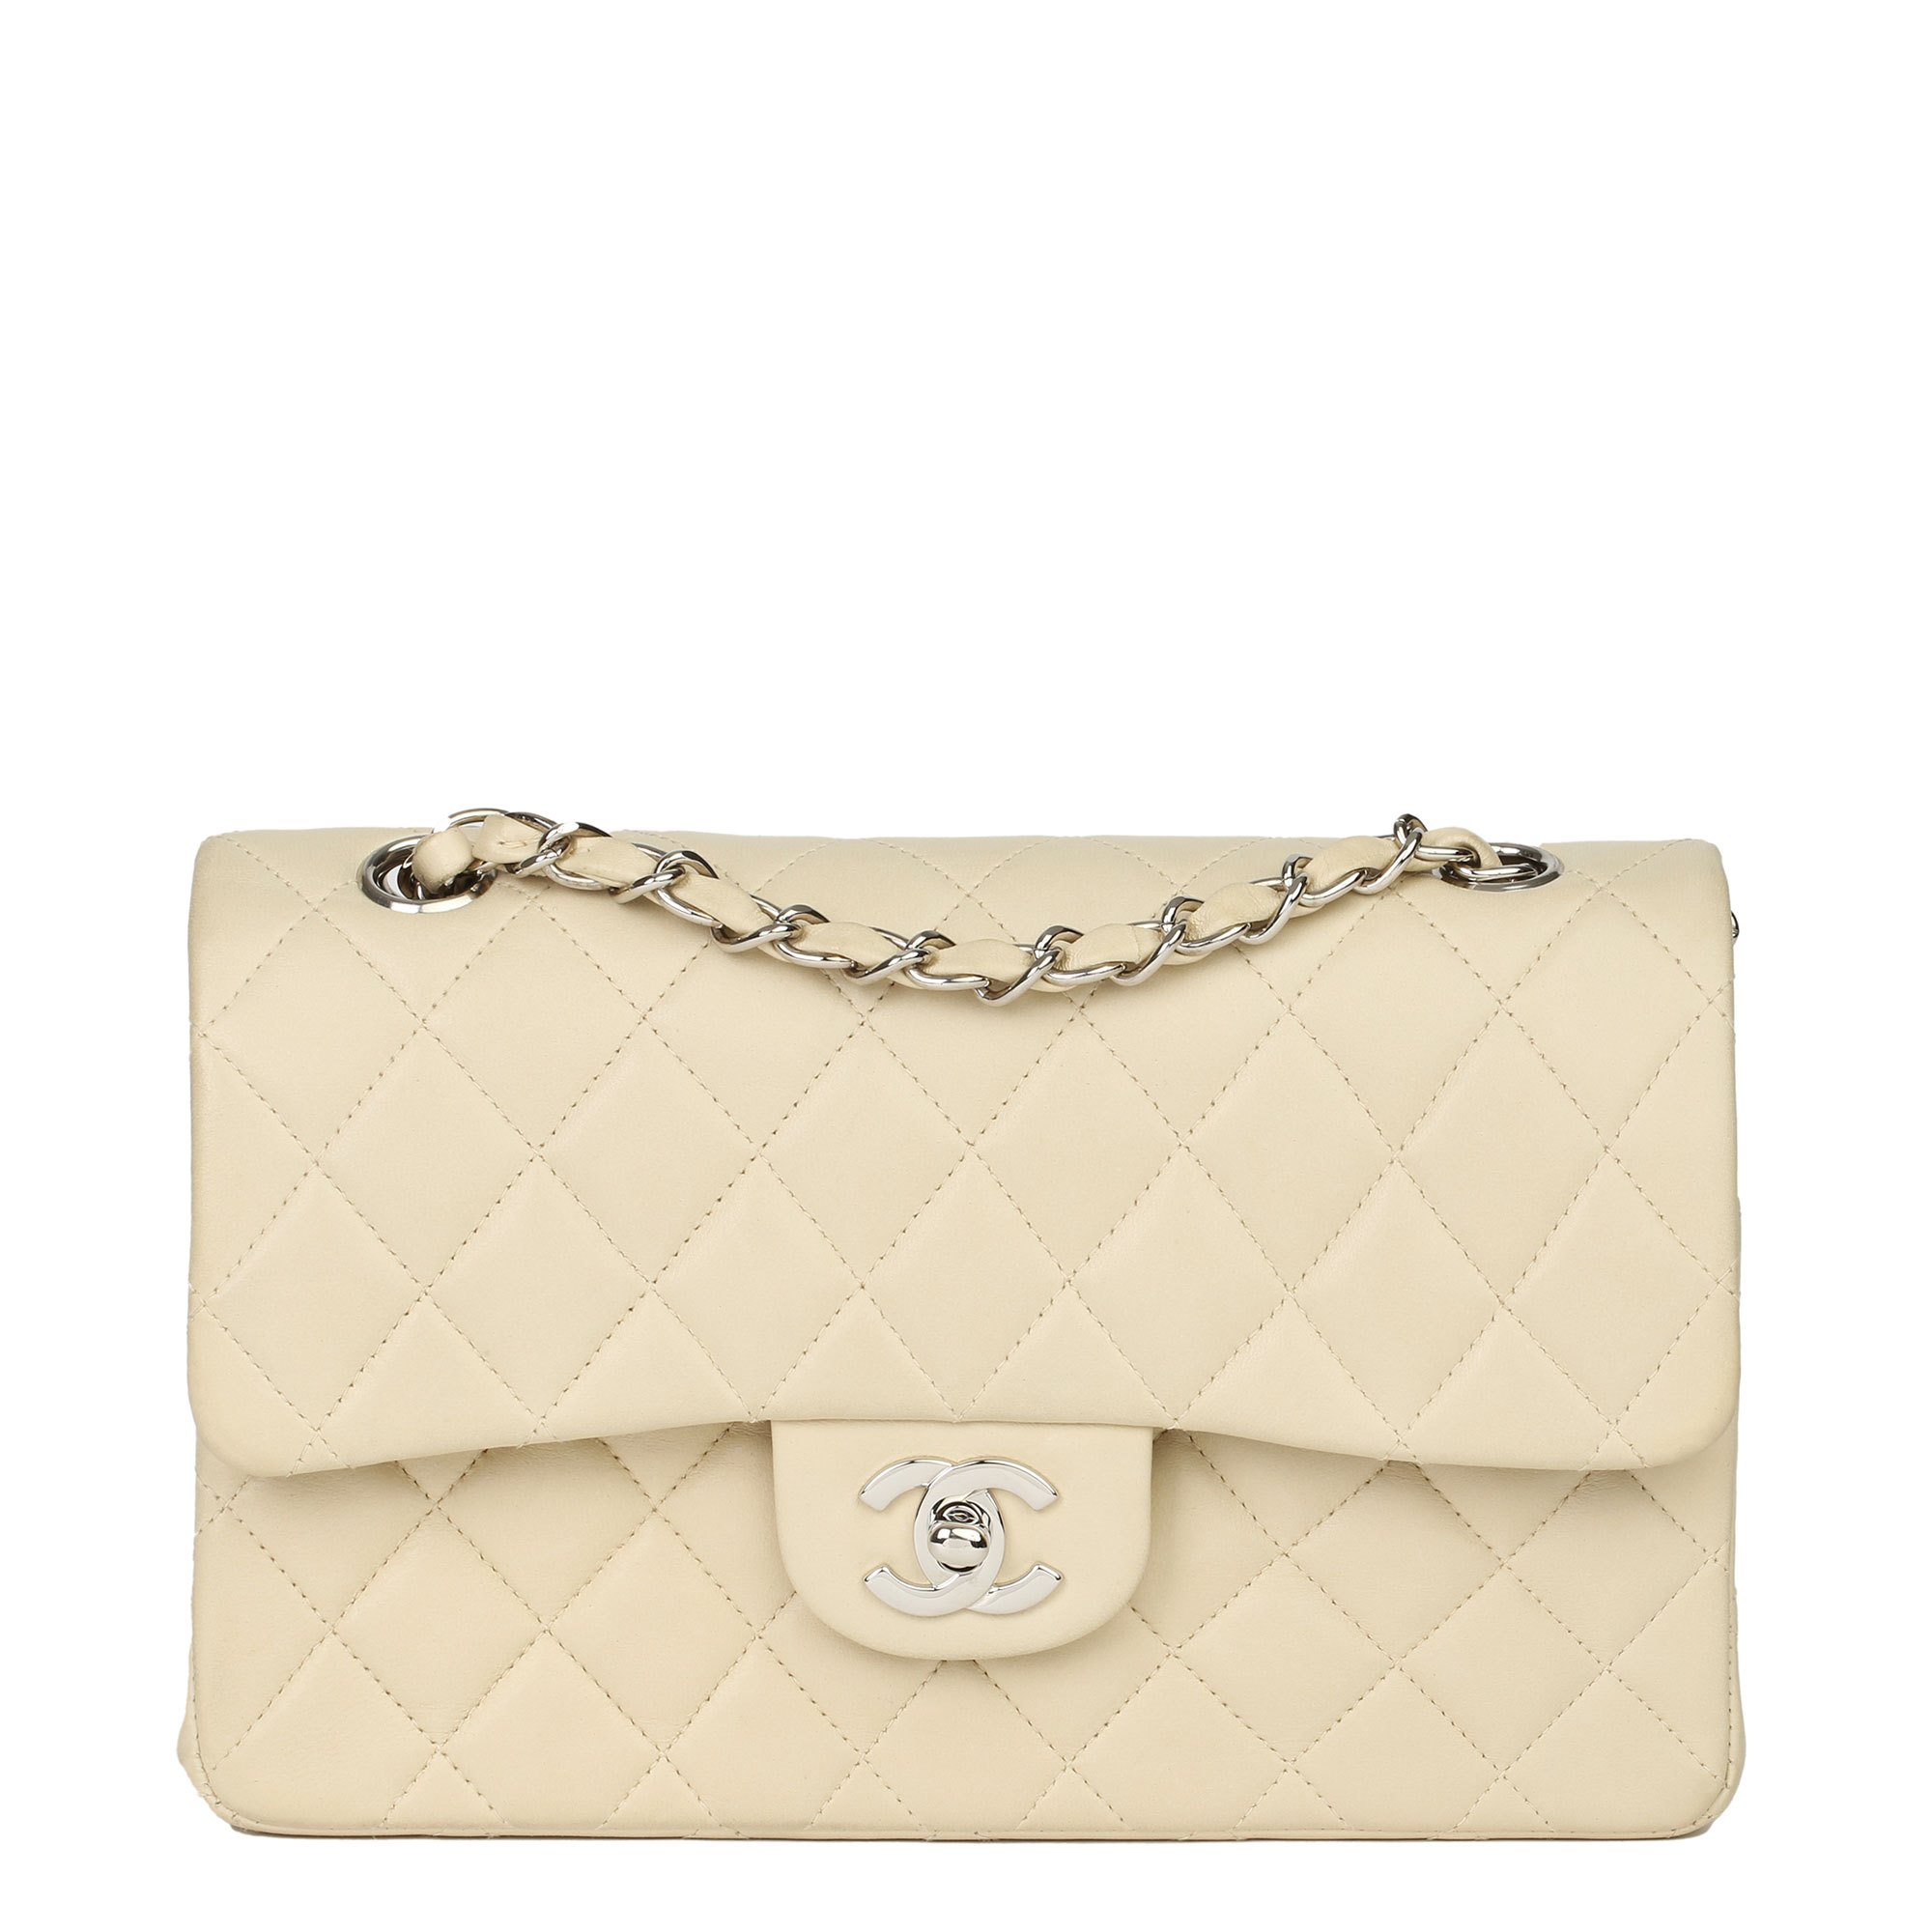 Chanel Small Classic Double Flap Bag 2000 HB3942 | Second Hand Handbags